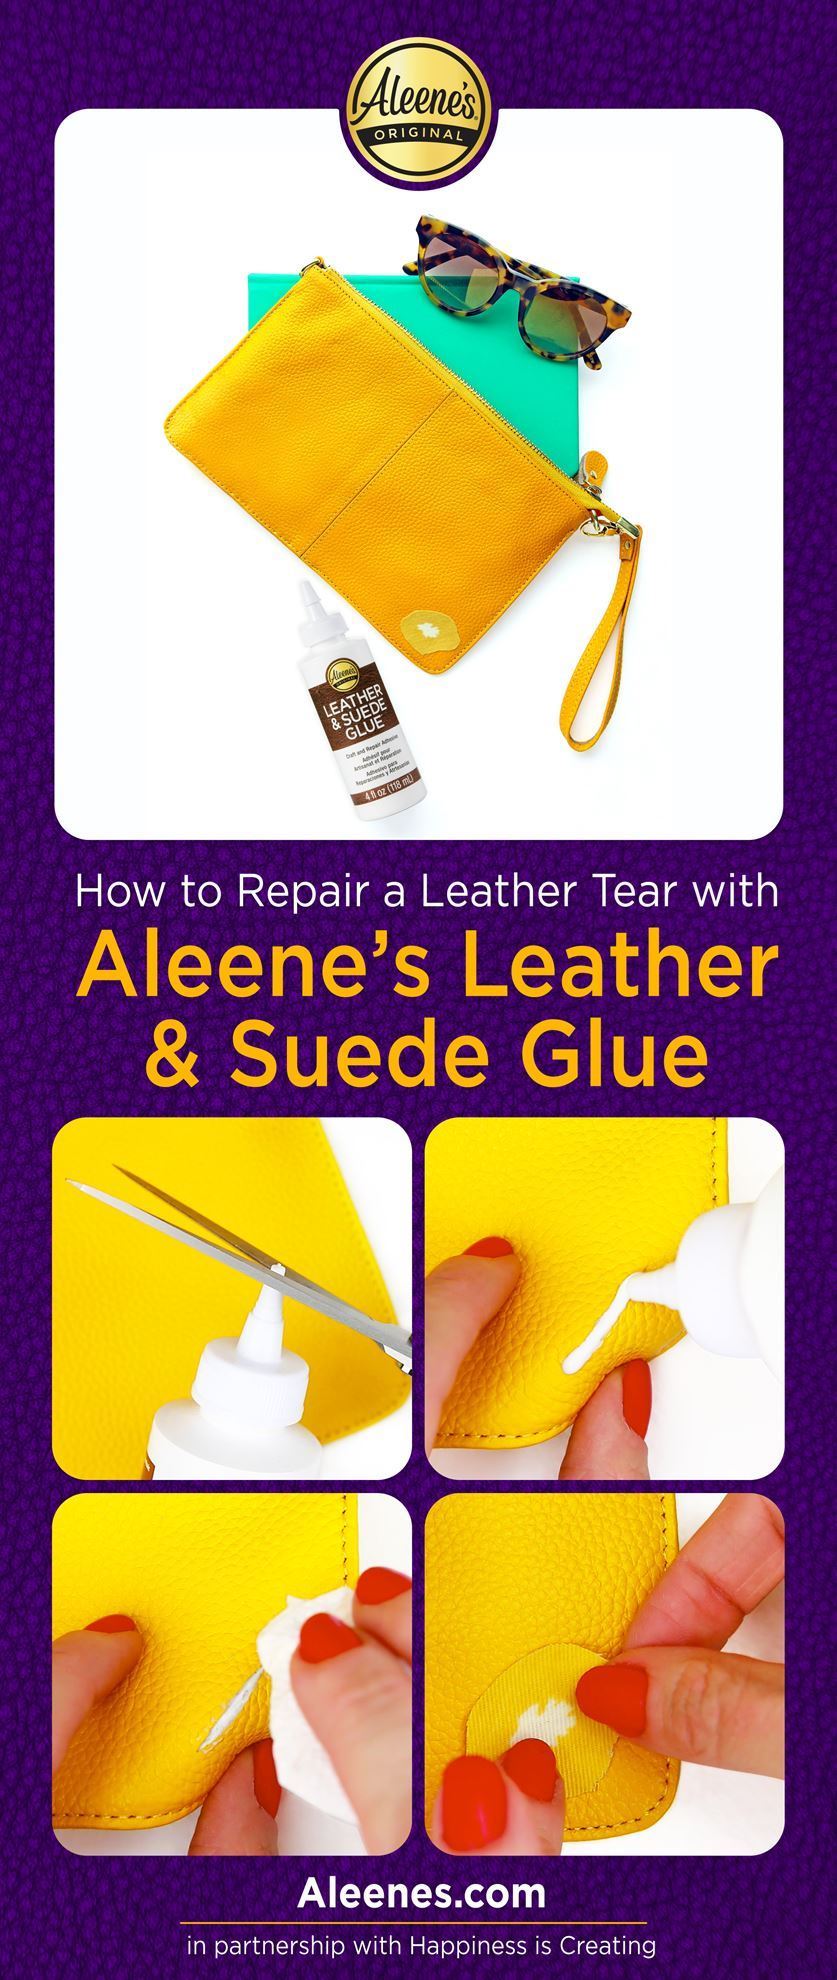 Diy Leather Glue Repair Kit For Ripped & Torn Leathers. No Mess